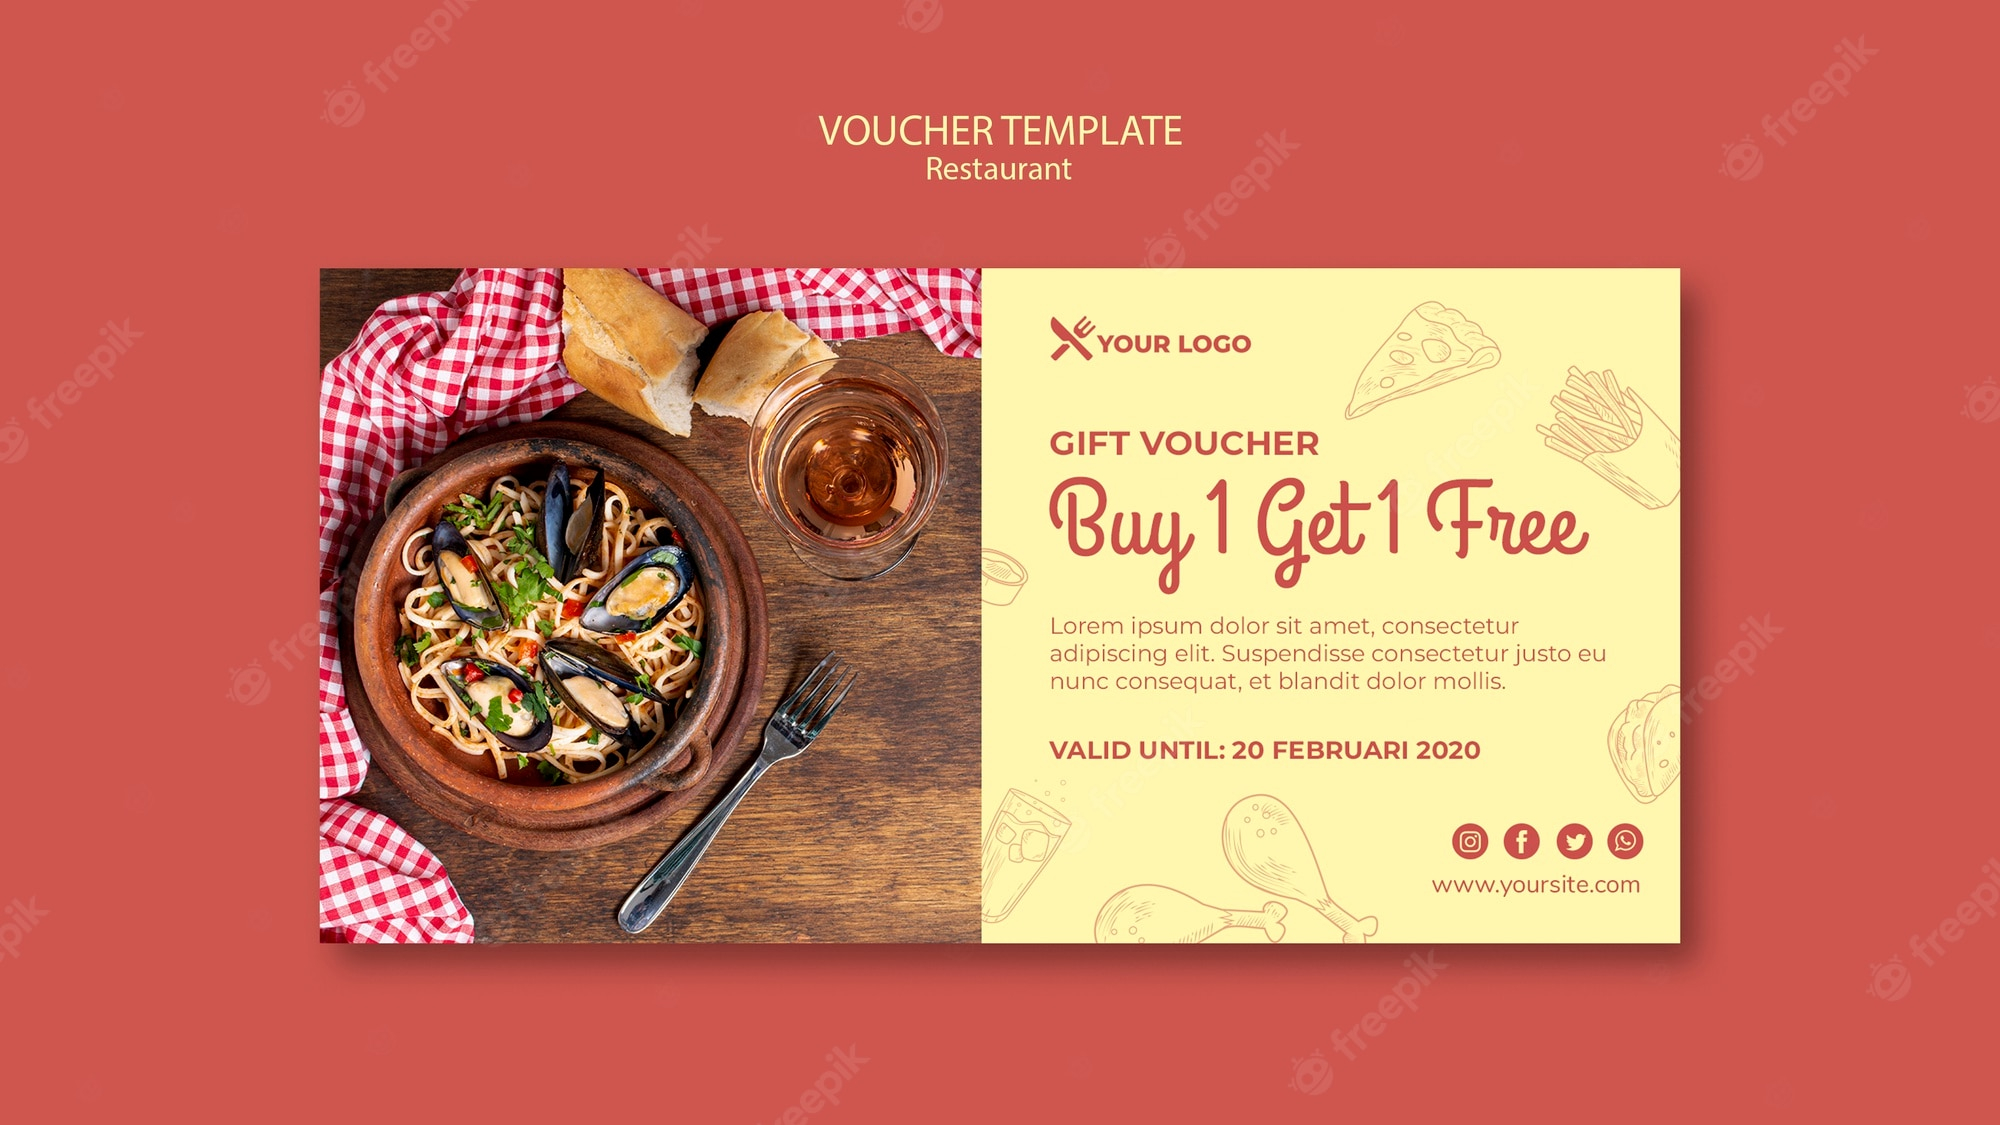 Restaurant gift voucher Images  Free Vectors, Stock Photos & PSD Intended For Restaurant Gift Certificate Template